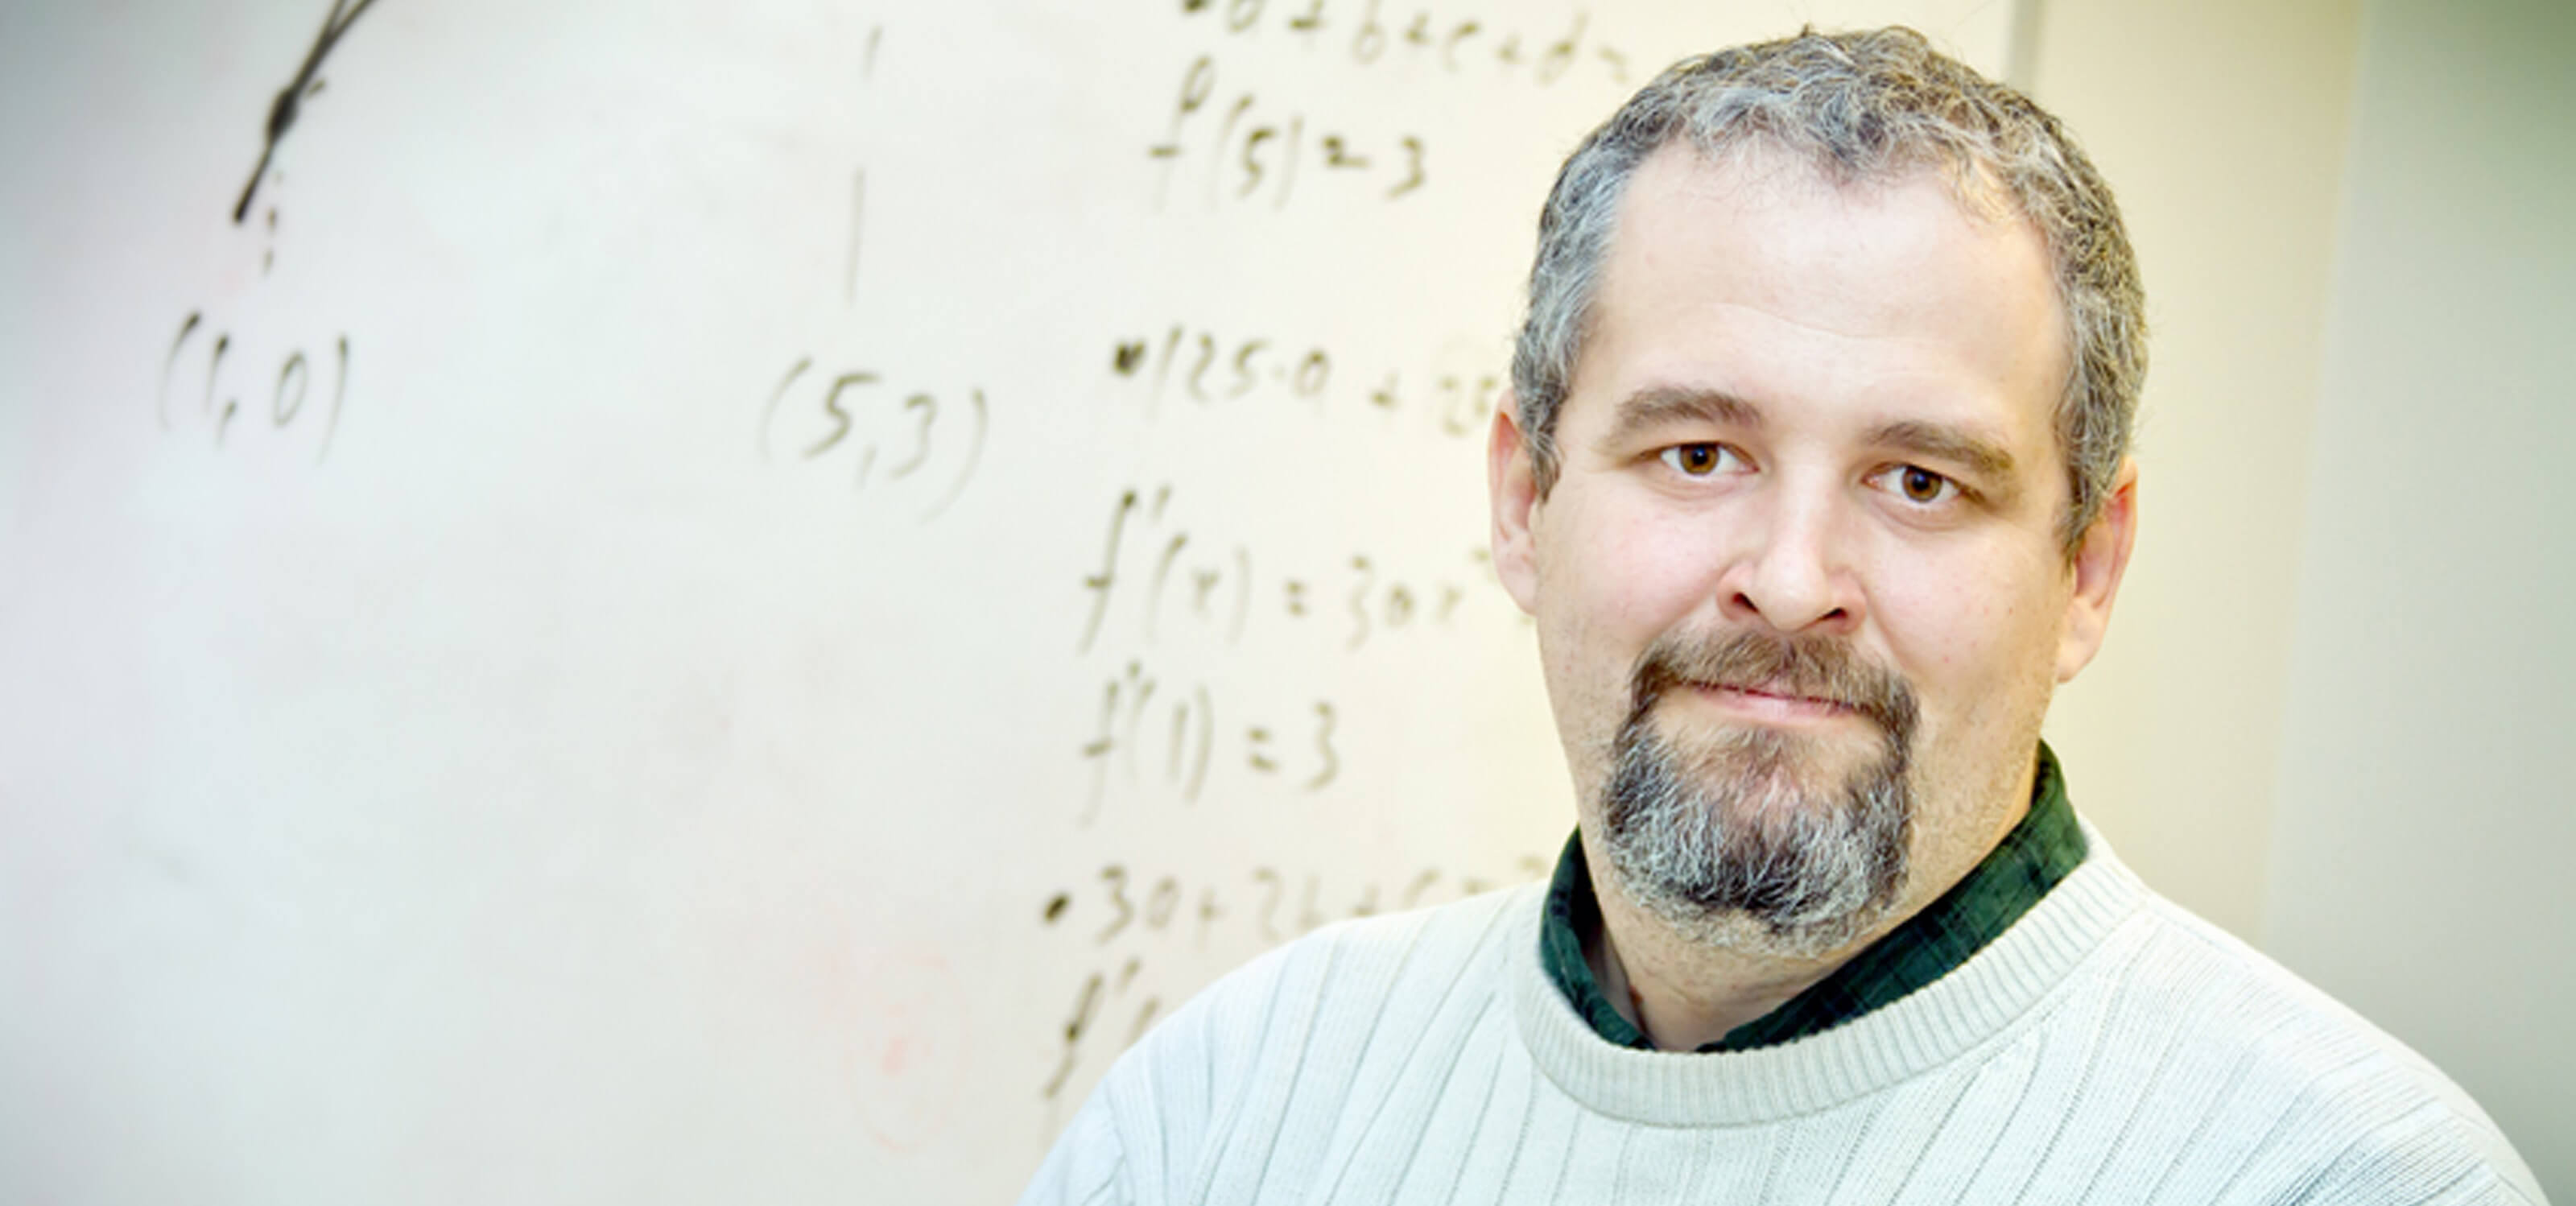 DigiPen mathematics professor Barnabas Bede smiling in front of a whiteboard decorated with mathematical formulas